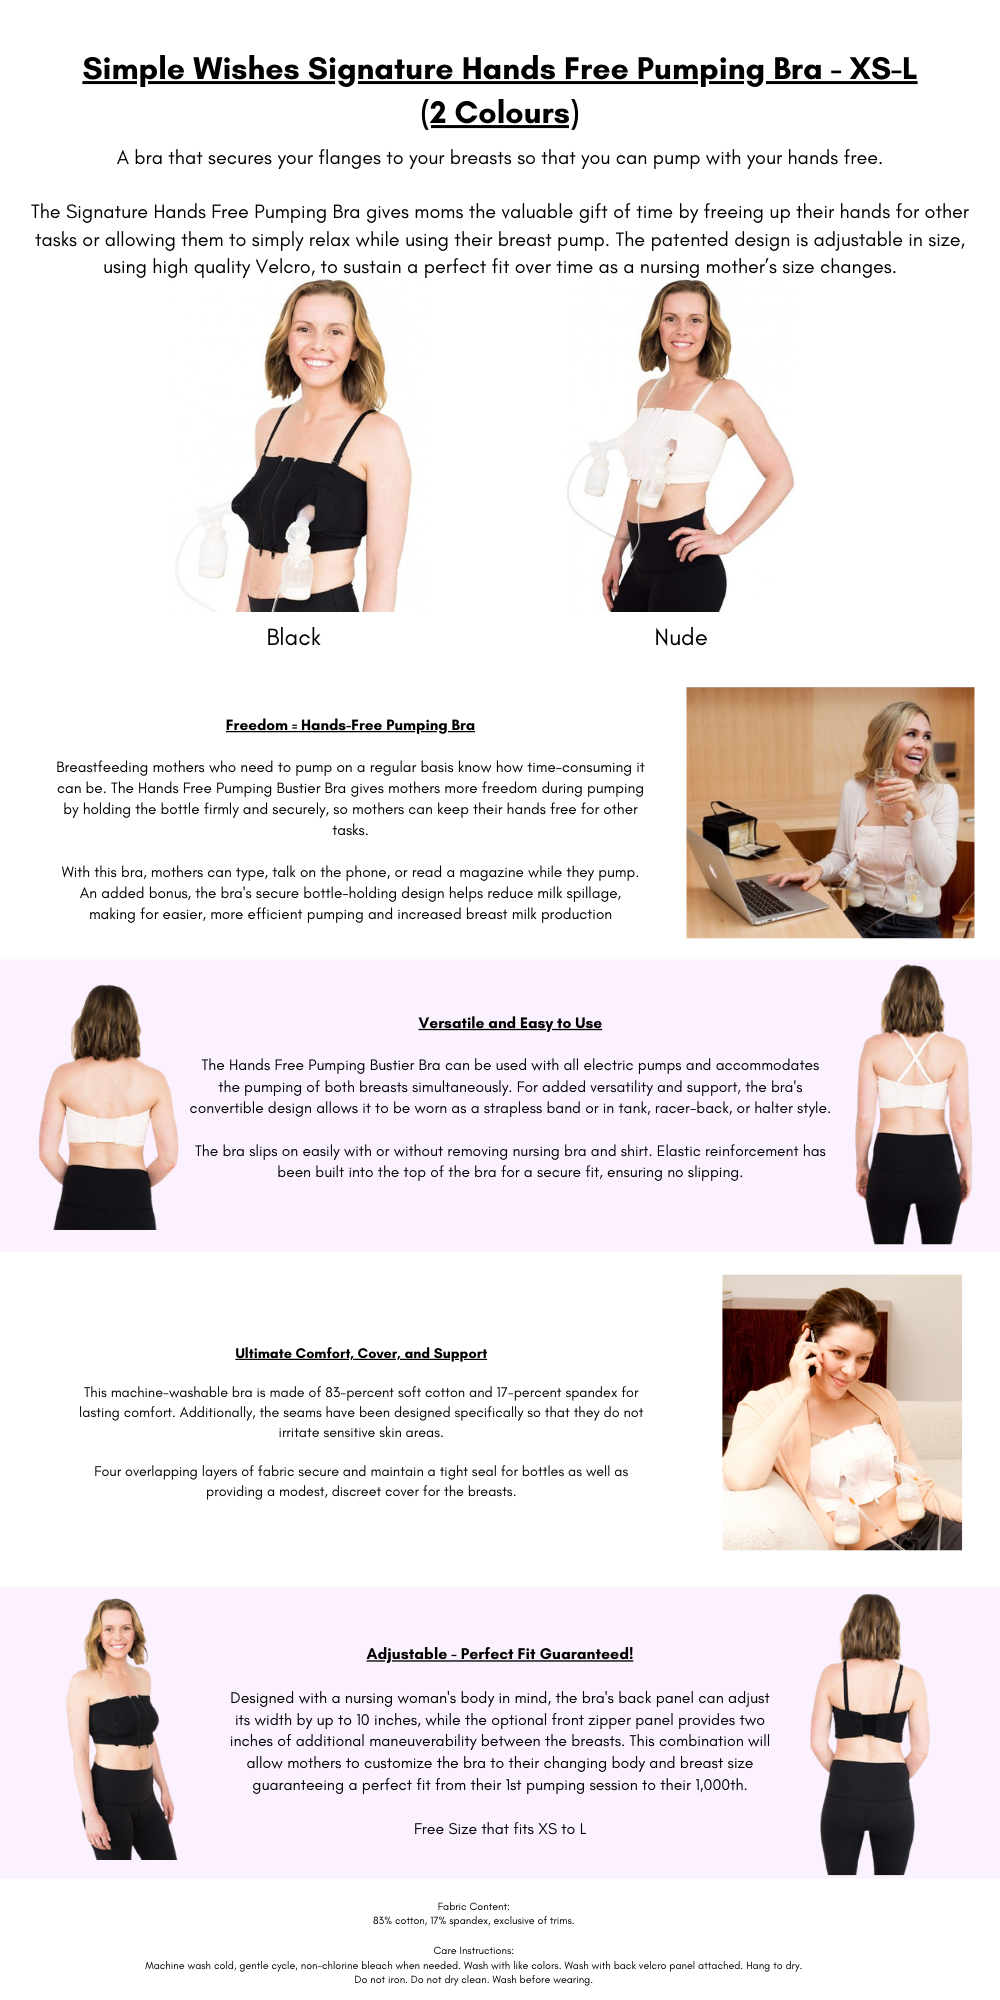 Simple Wishes Signature Hands Free Pumping Bra - XS-L (2 Colours), Baby  Clothing & Accessories Singapore